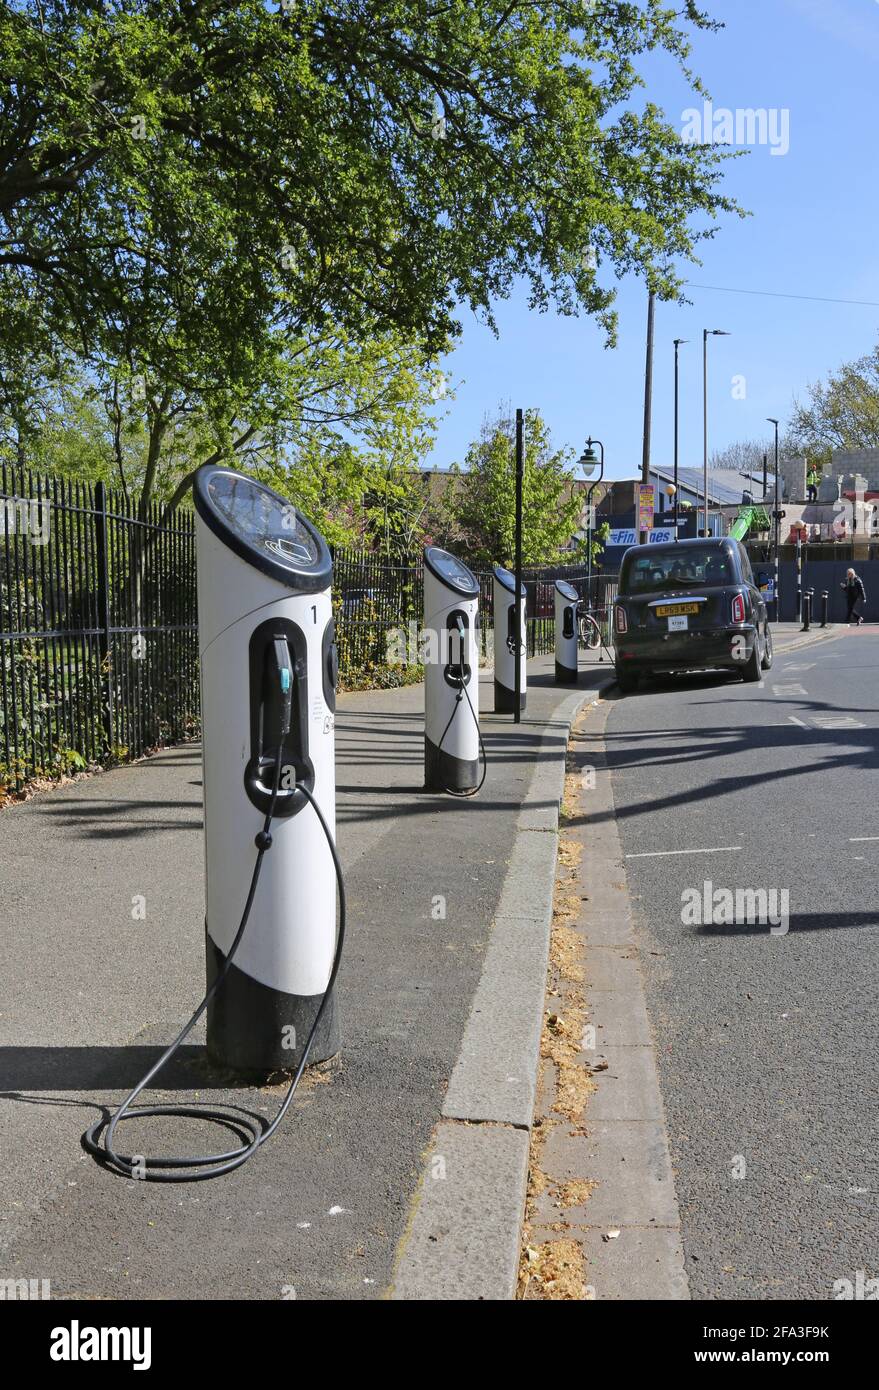 Kerbside electric vehicle charging points on Elmwood Rd in Dulwich, London, UK. Shows new LEVC TX plug-in hybrid electric taxi connected and charging. Stock Photo